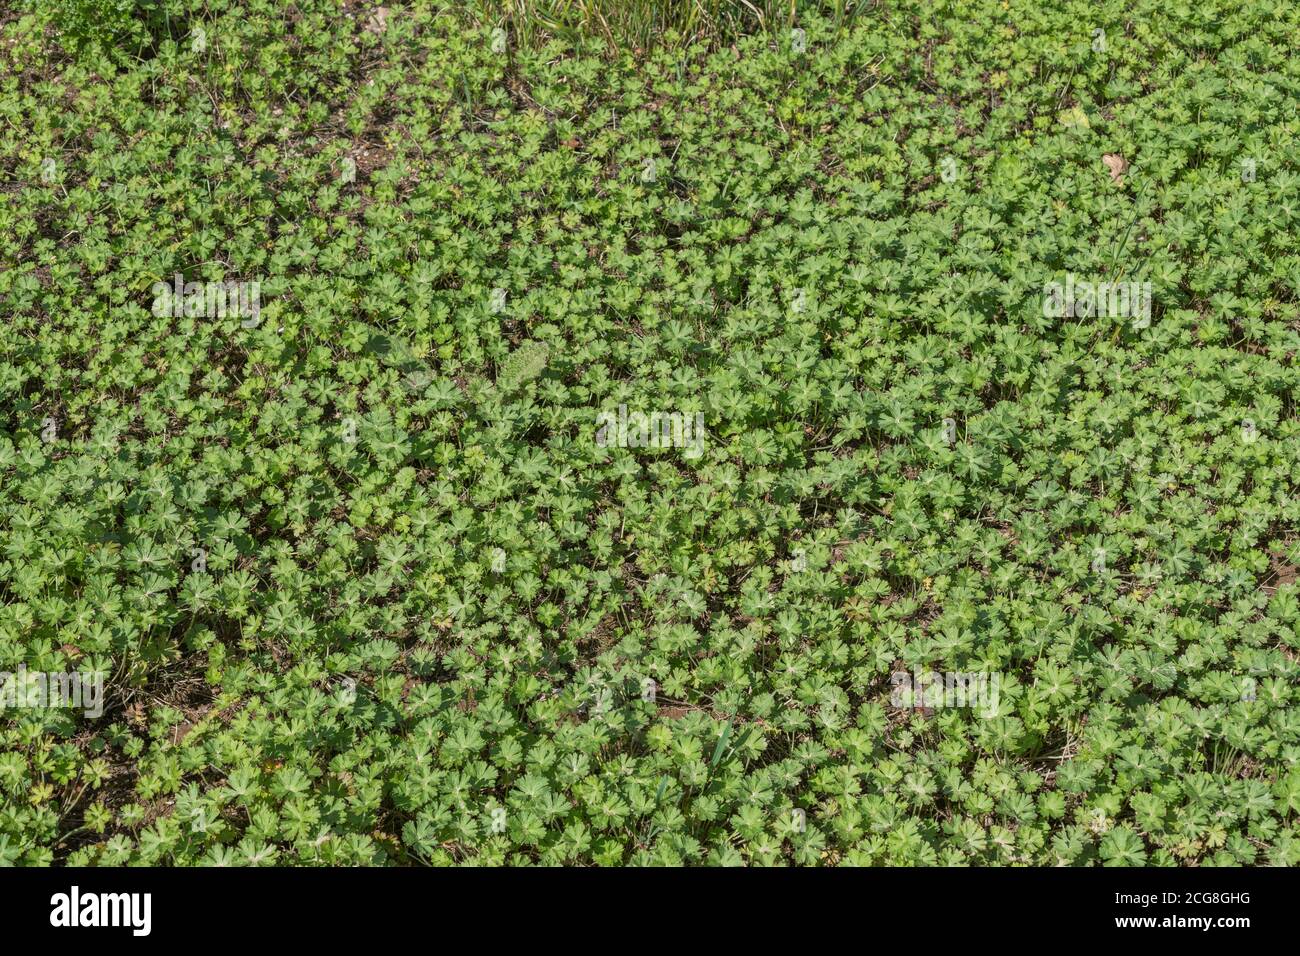 Masses leaves of Buttercups / Ranunculus, though uncertain of which Buttercup species. For agricultural weeds, overgrown by weeds, weed patch. Stock Photo